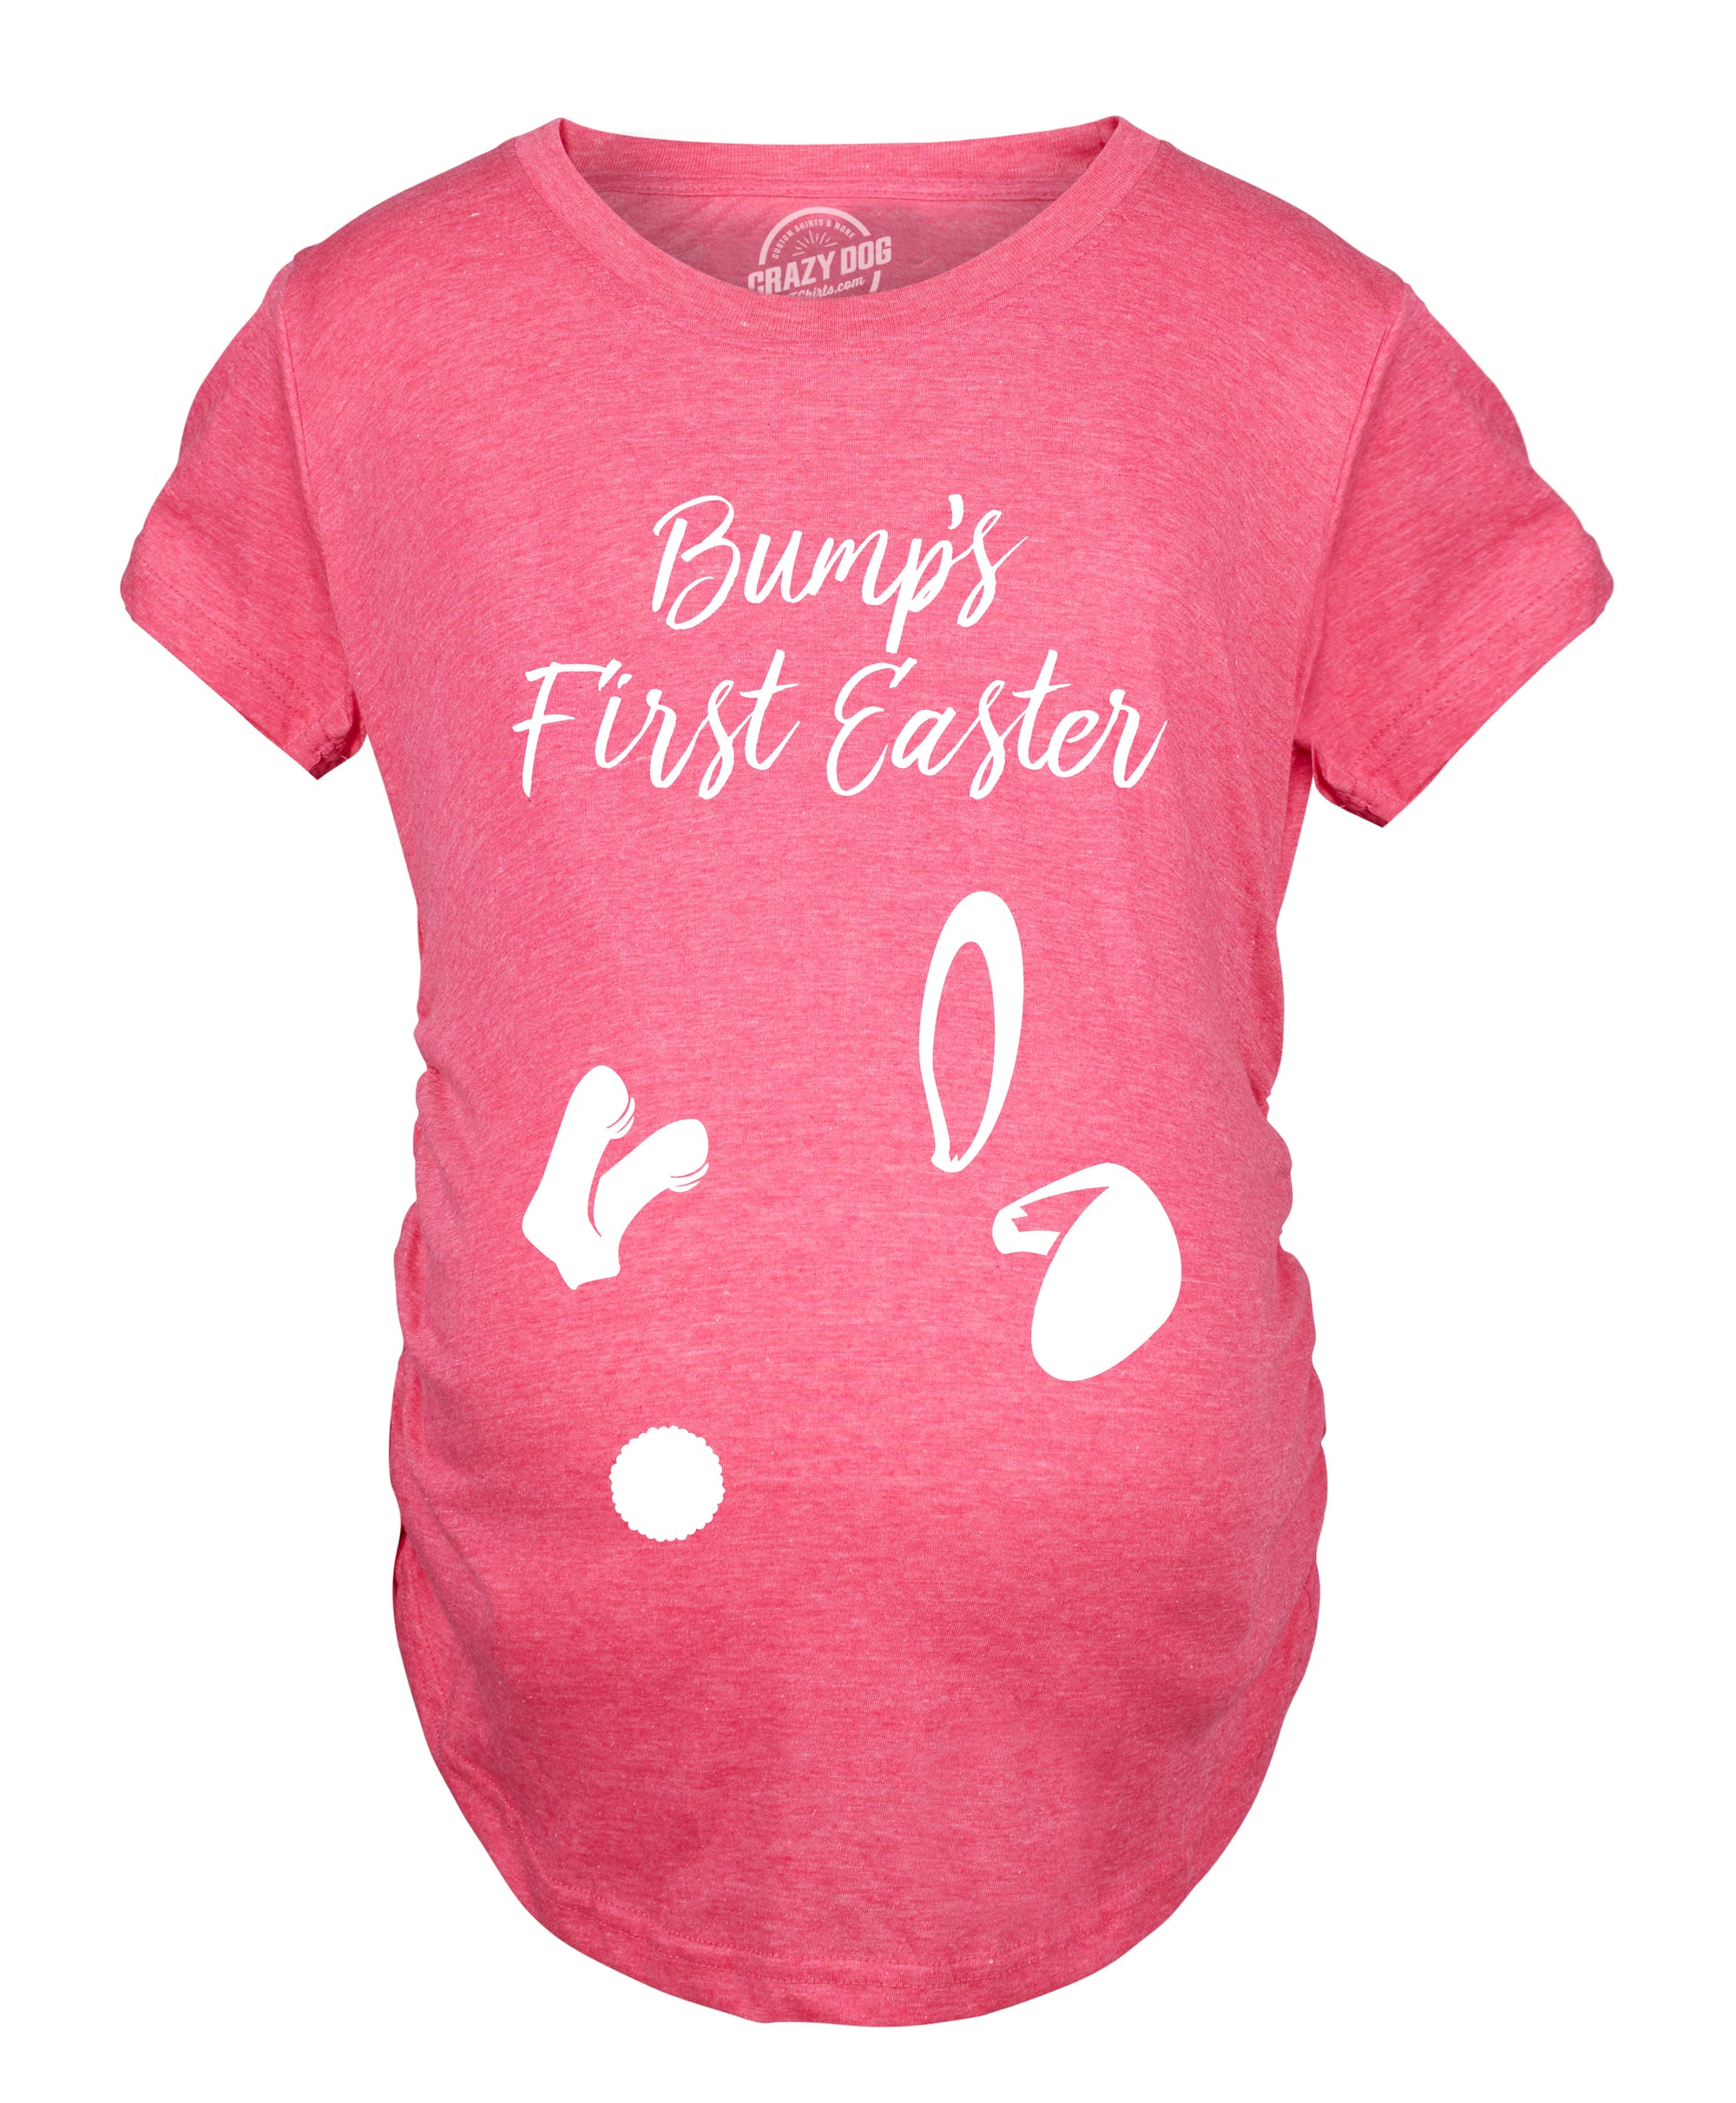 Funny Bumps First Easter Maternity T Shirt Nerdy Easter Tee